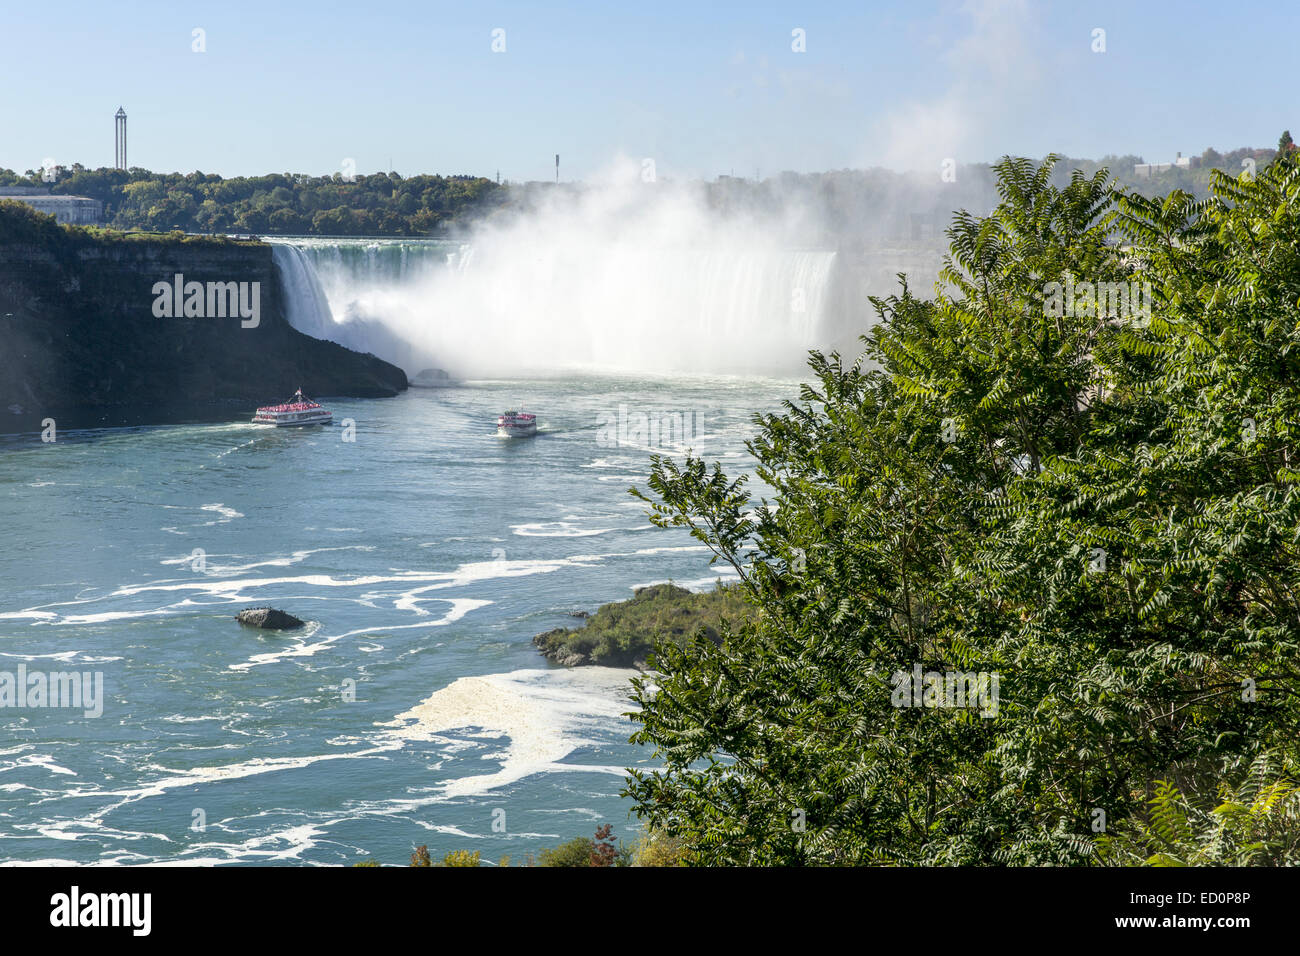 Niagra Falls showing the tourist boats with spray, blue sky and foreground foliage. Stock Photo